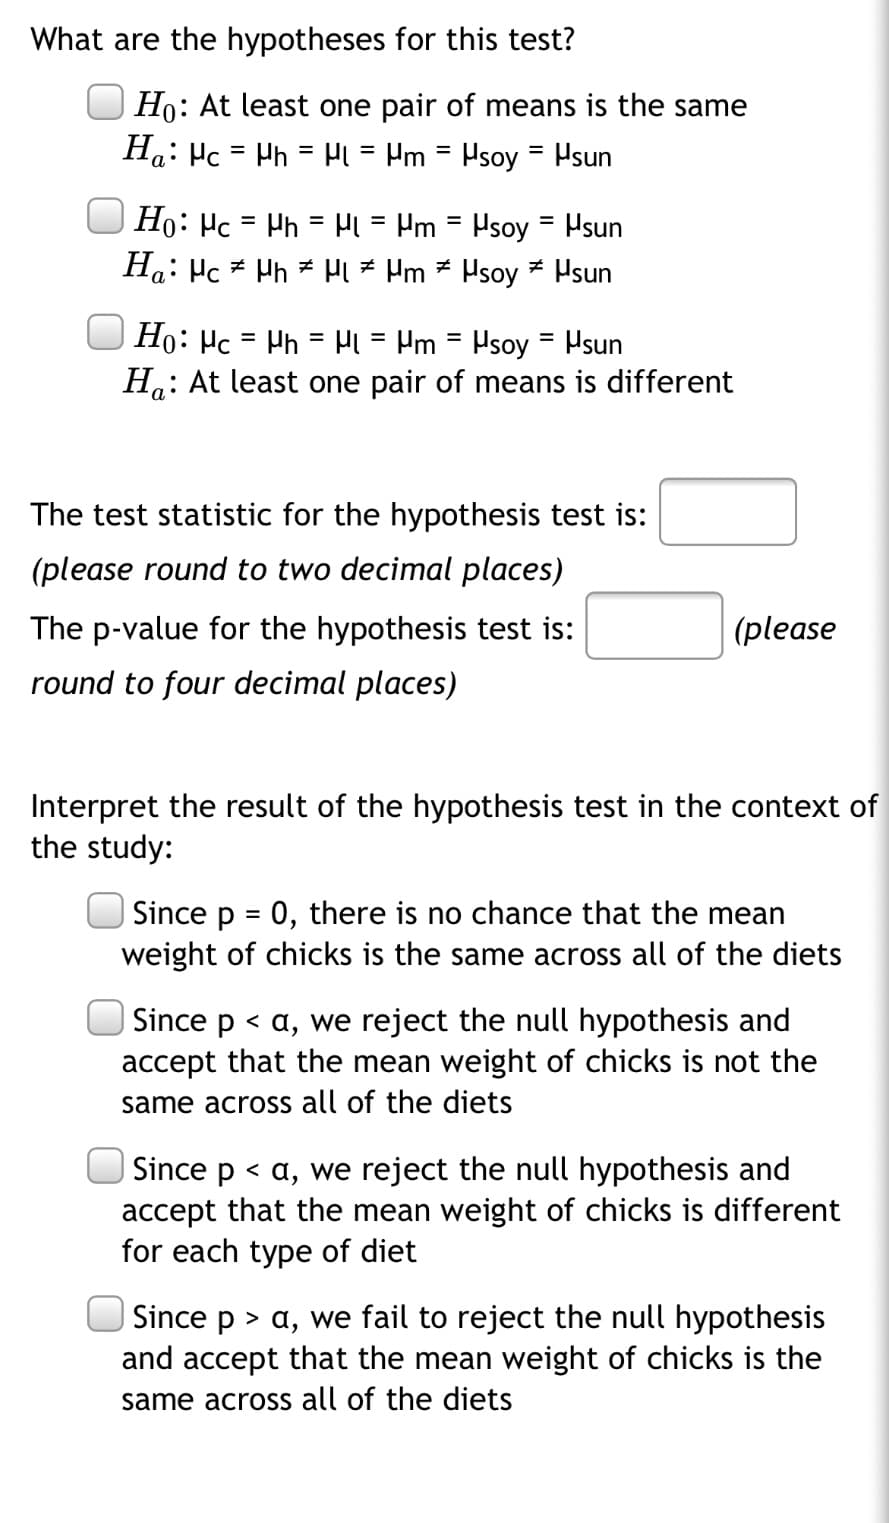 What are the hypotheses for this test?
Ho: At least one pair of means is the same
Ha: Hc = Ph = H = Hm = Psoy = Psun
%3D
Ho: Hc = Ph = Hi = Pm = Psoy
Ha: Hc Hh * Pl = Pm * Hsoy = Hsun
Hsun
%3D
%3D
Ho: Hc = Ph = H = Pm = Psoy
H.: At least one pair of means is different
Hsun
%3D
а
The test statistic for the hypothesis test is:
(please round to two decimal places)
The p-value for the hypothesis test is:
(please
round to four decimal places)
Interpret the result of the hypothesis test in the context of
the study:
| Since p = 0, there is no chance that the mean
weight of chicks is the same across all of the diets
Since p < a, we reject the null hypothesis and
accept that the mean weight of chicks is not the
same across all of the diets
| Since p < a, we reject the null hypothesis and
accept that the mean weight of chicks is different
for each type of diet
| Since p > a, we fail to reject the null hypothesis
and accept that the mean weight of chicks is the
same across all of the diets
